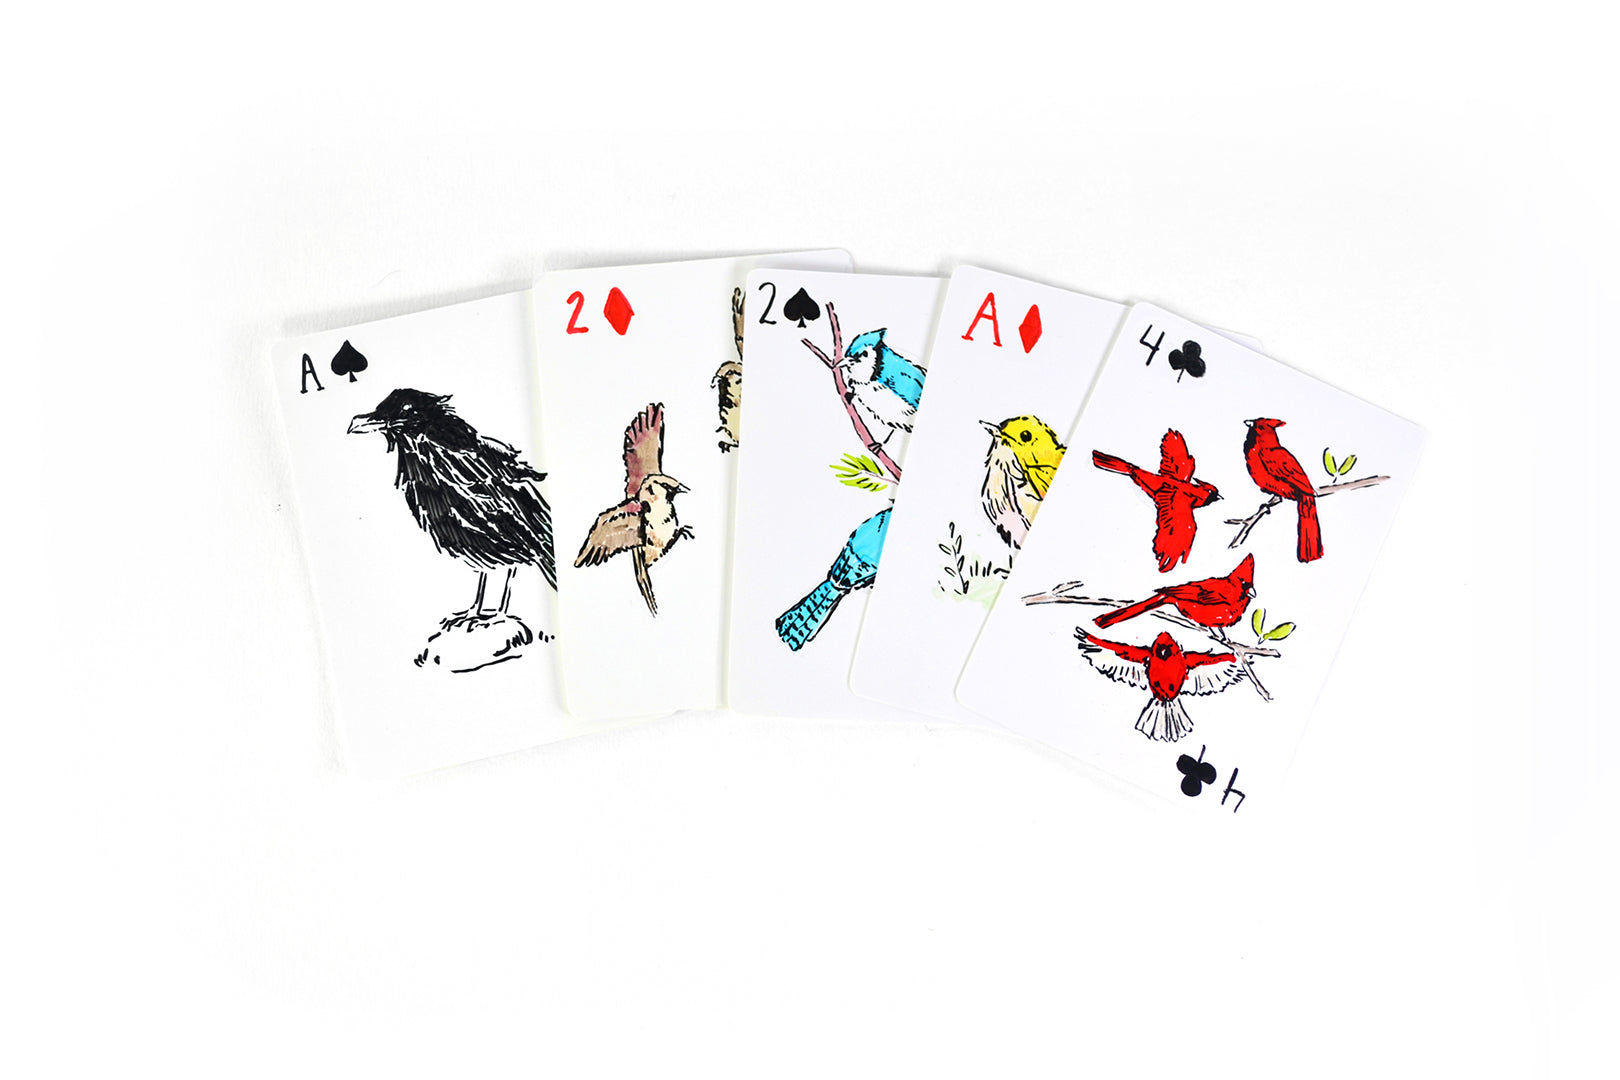 Apostrophe Games Blank Playing Cards (Matte Finish & Poker Size) 180 Cards